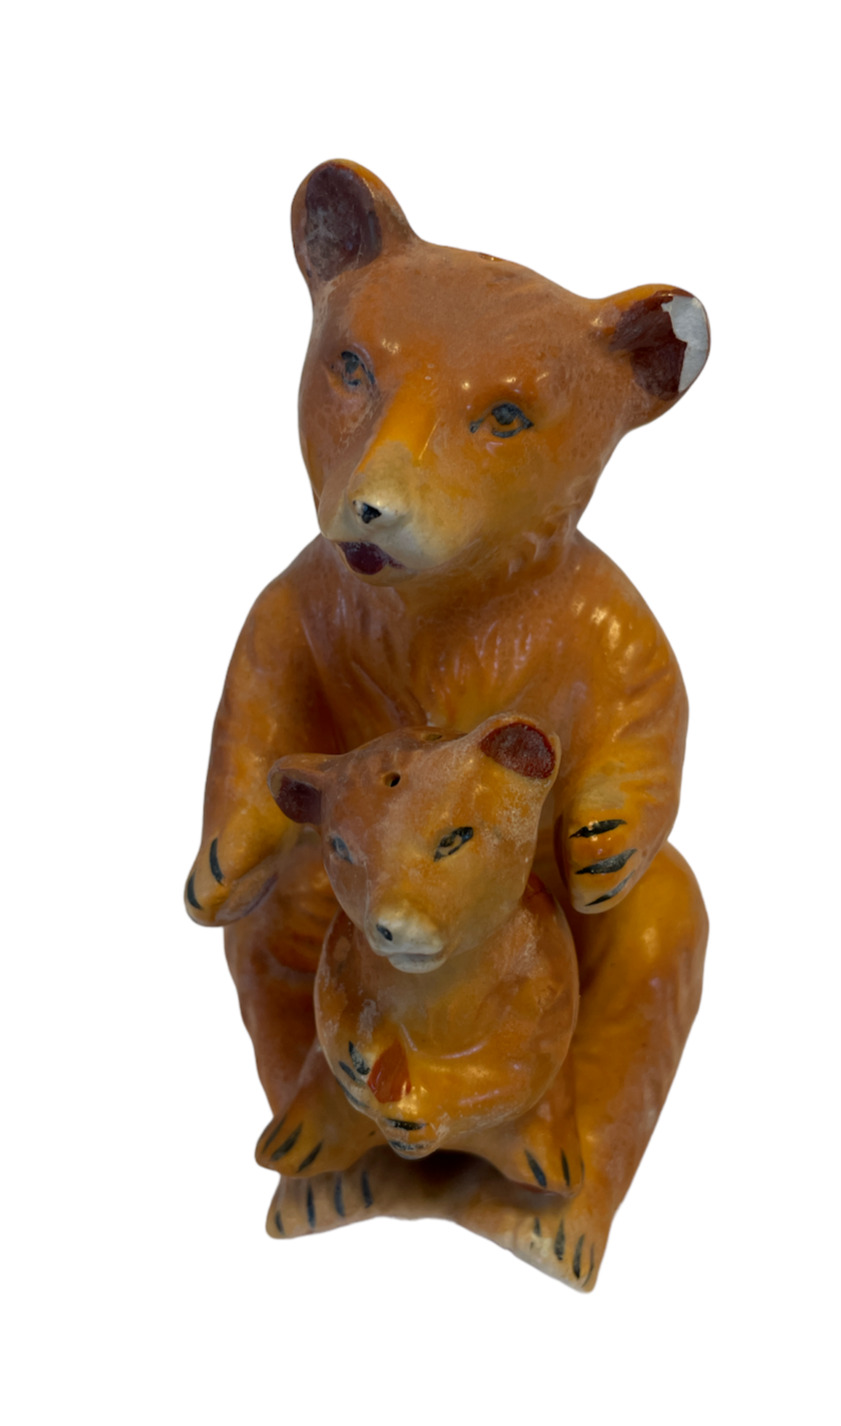 RARE Vintage BROWN Bear MOTHER BABY Cub Salt and Pepper Shakers Japan